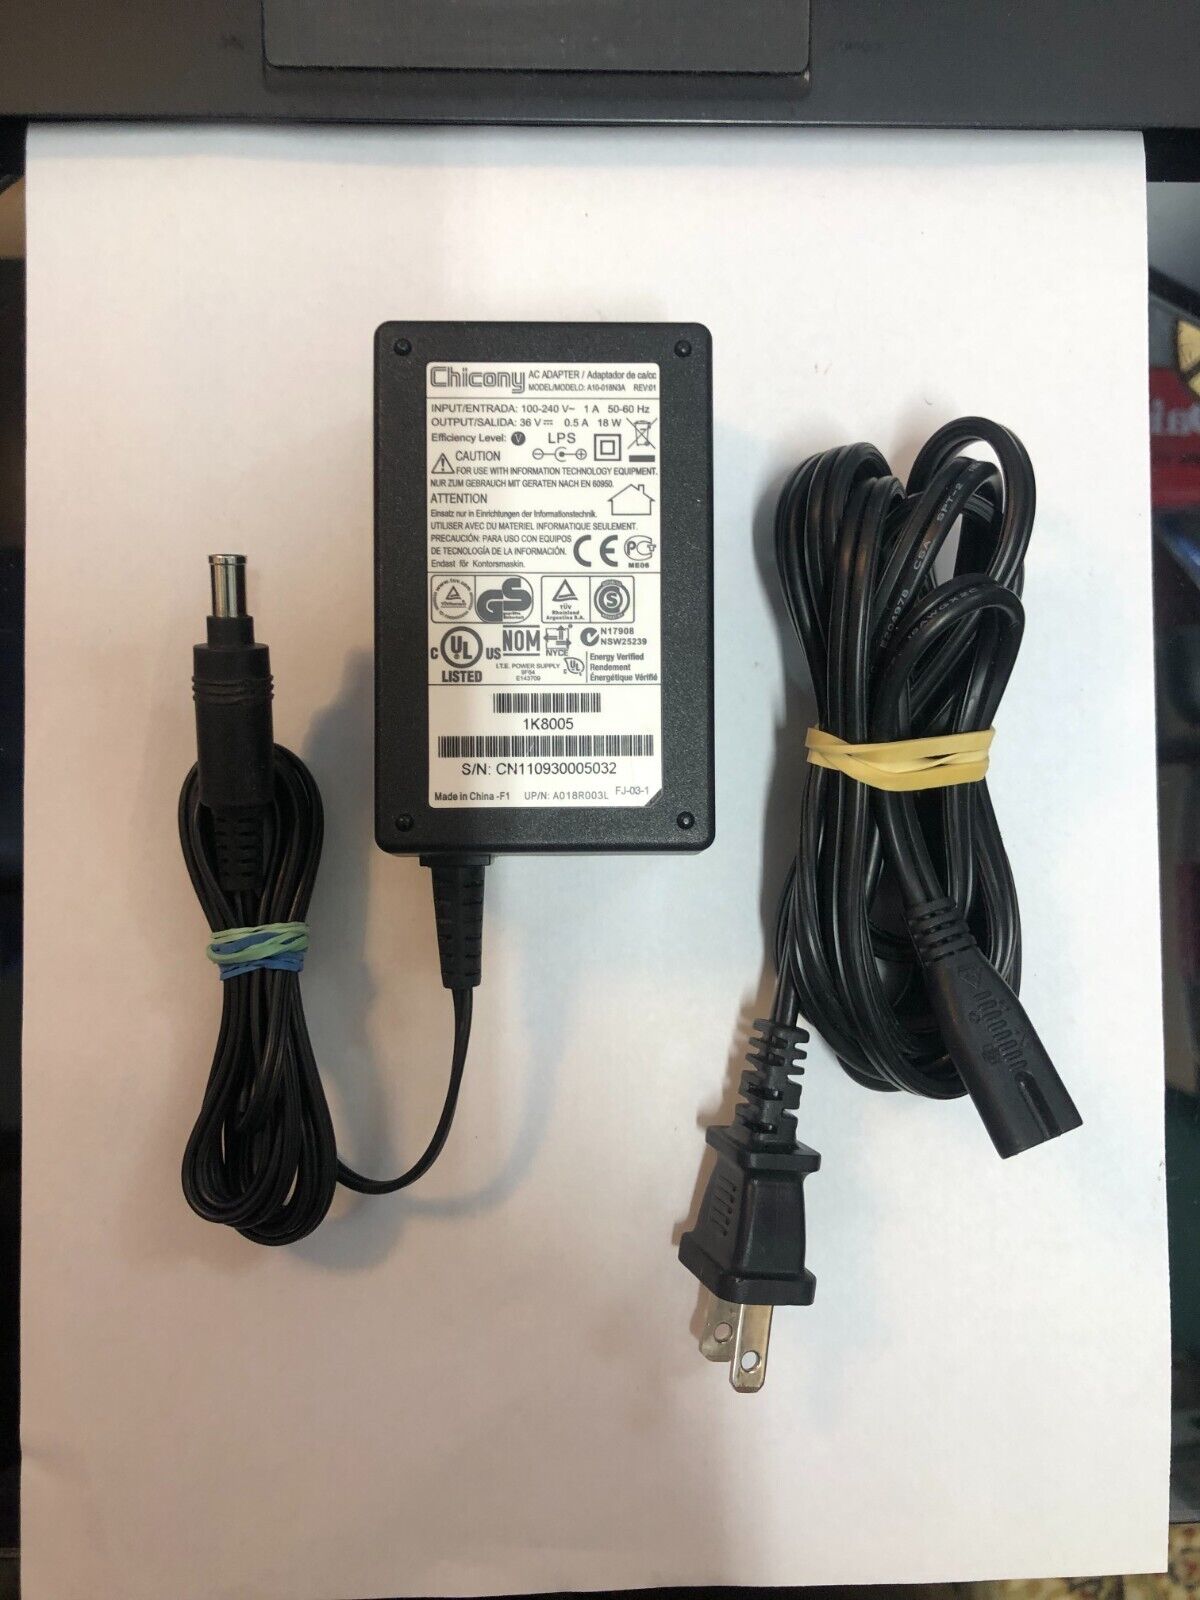 Genuine Switching Chicony AC Adapter For Kodak Printer - Model A10-018N3A - 36V